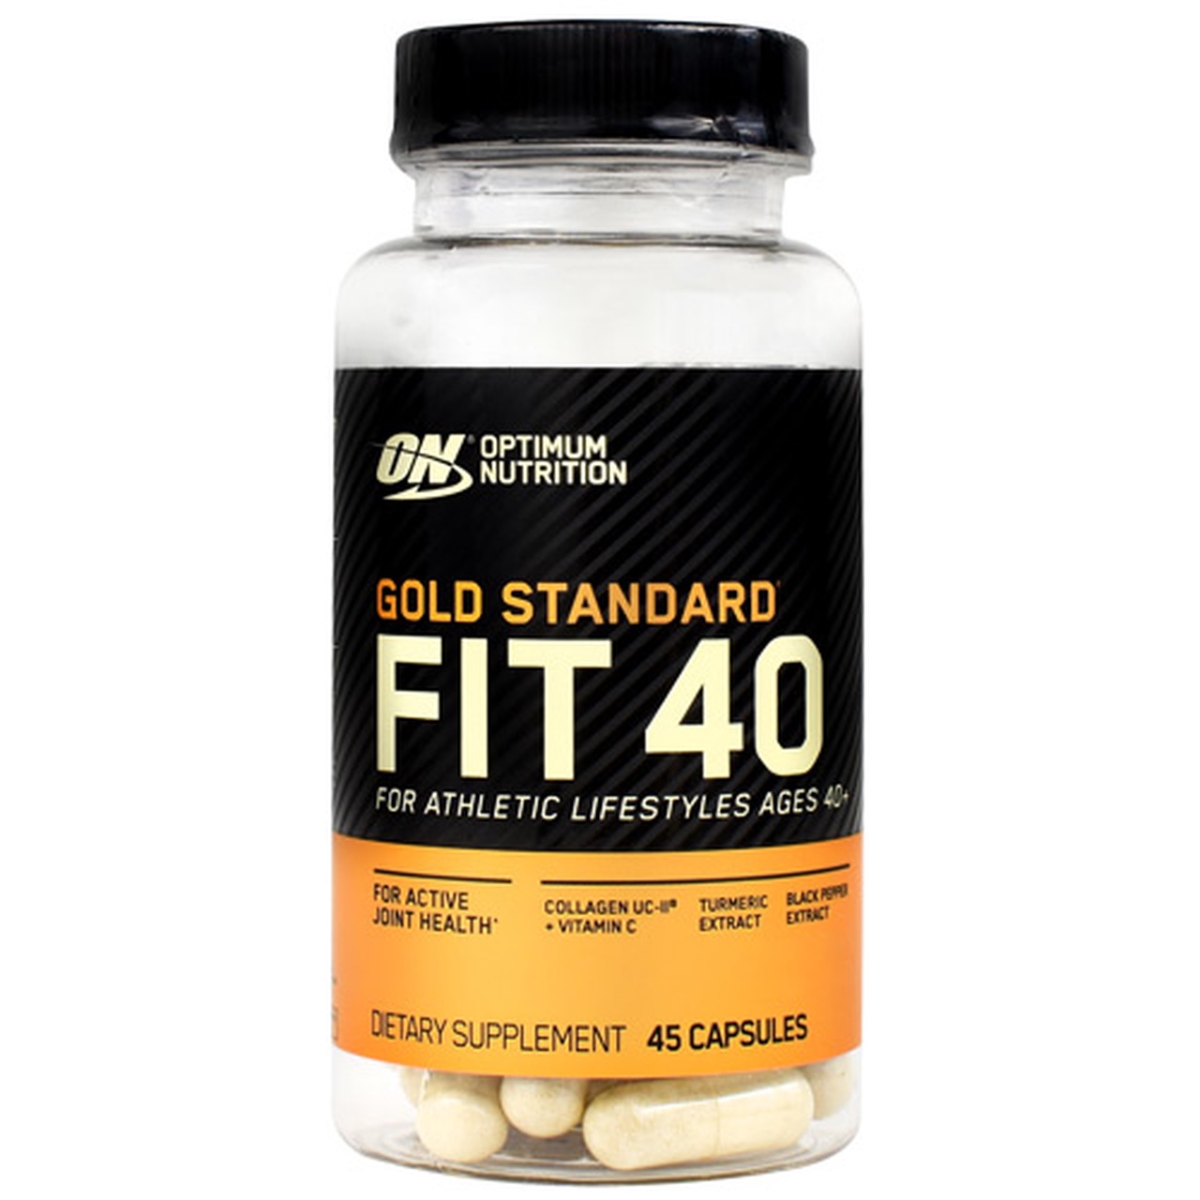 2730678 Fit 40 For Active Joint Health - 45 Capsules